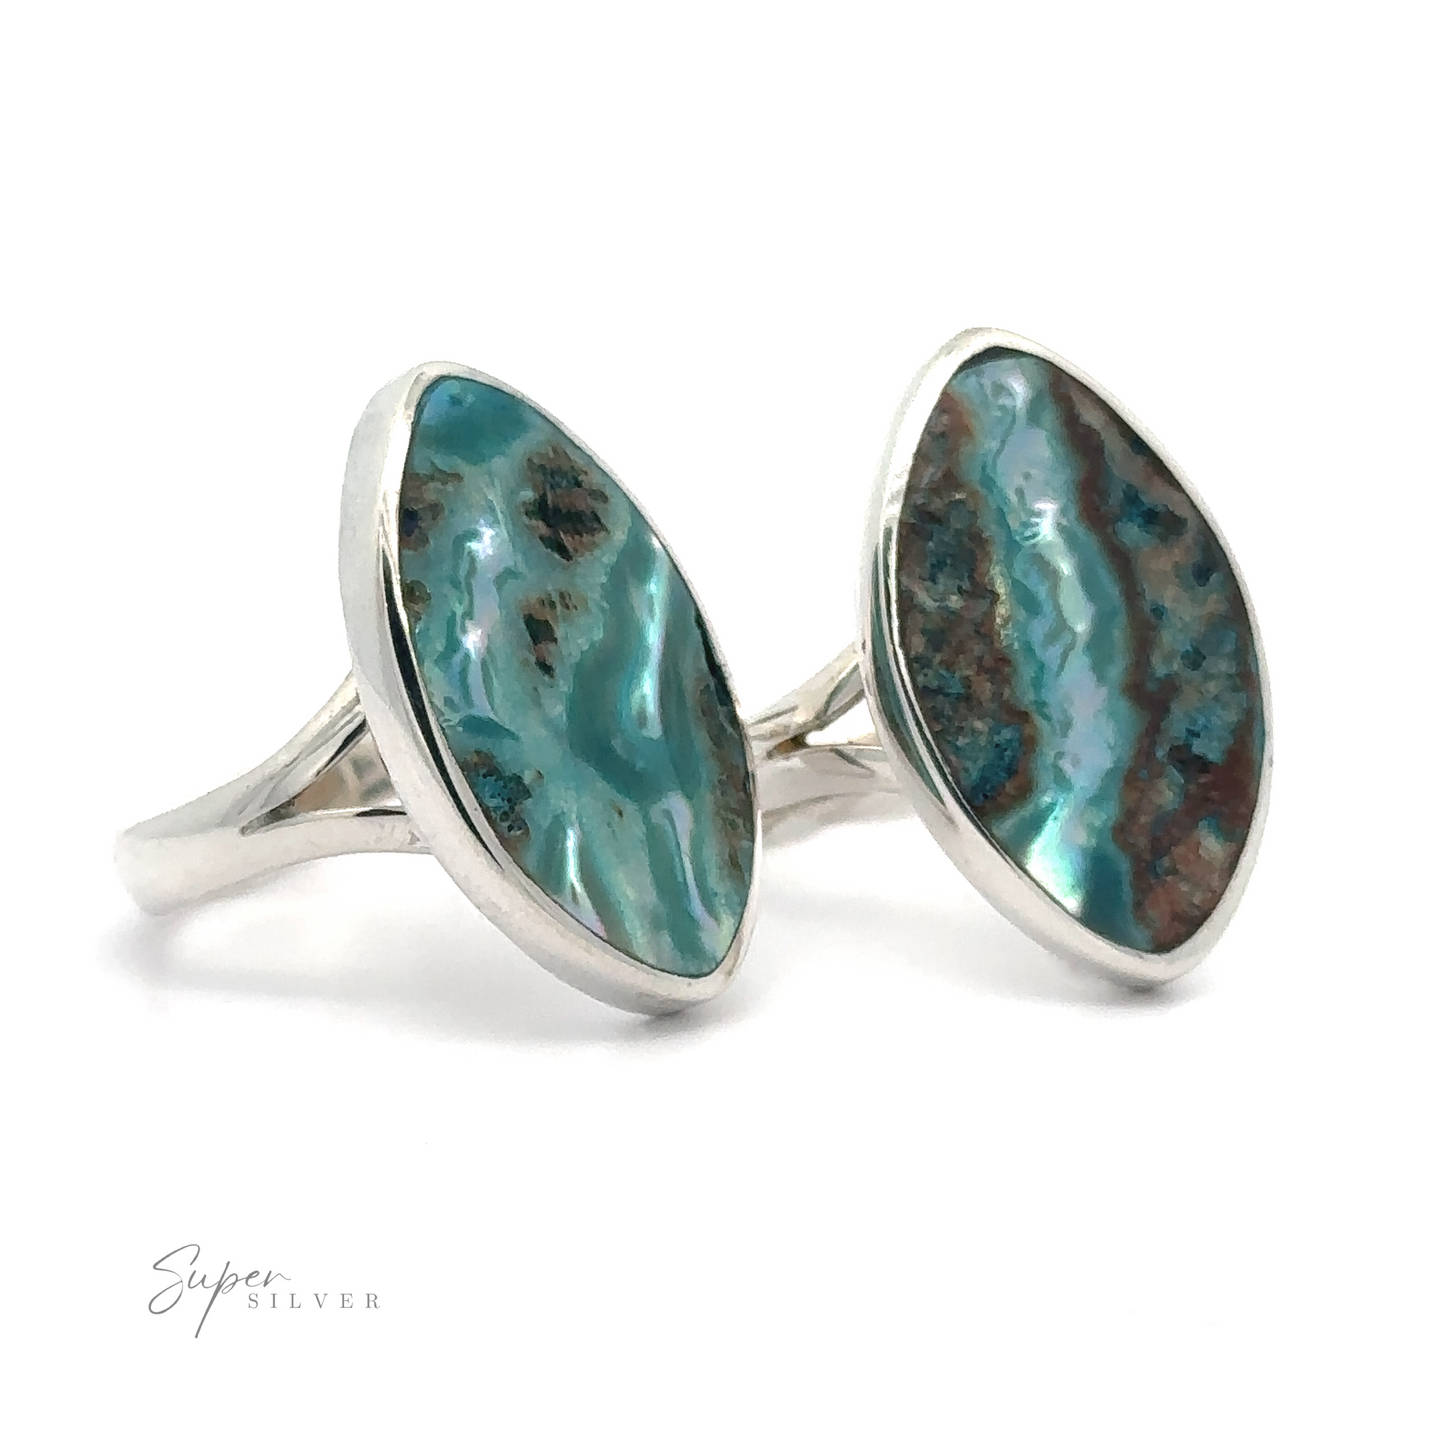 Dyed Natural Abalone Ring with oval turquoise gemstone inlays.